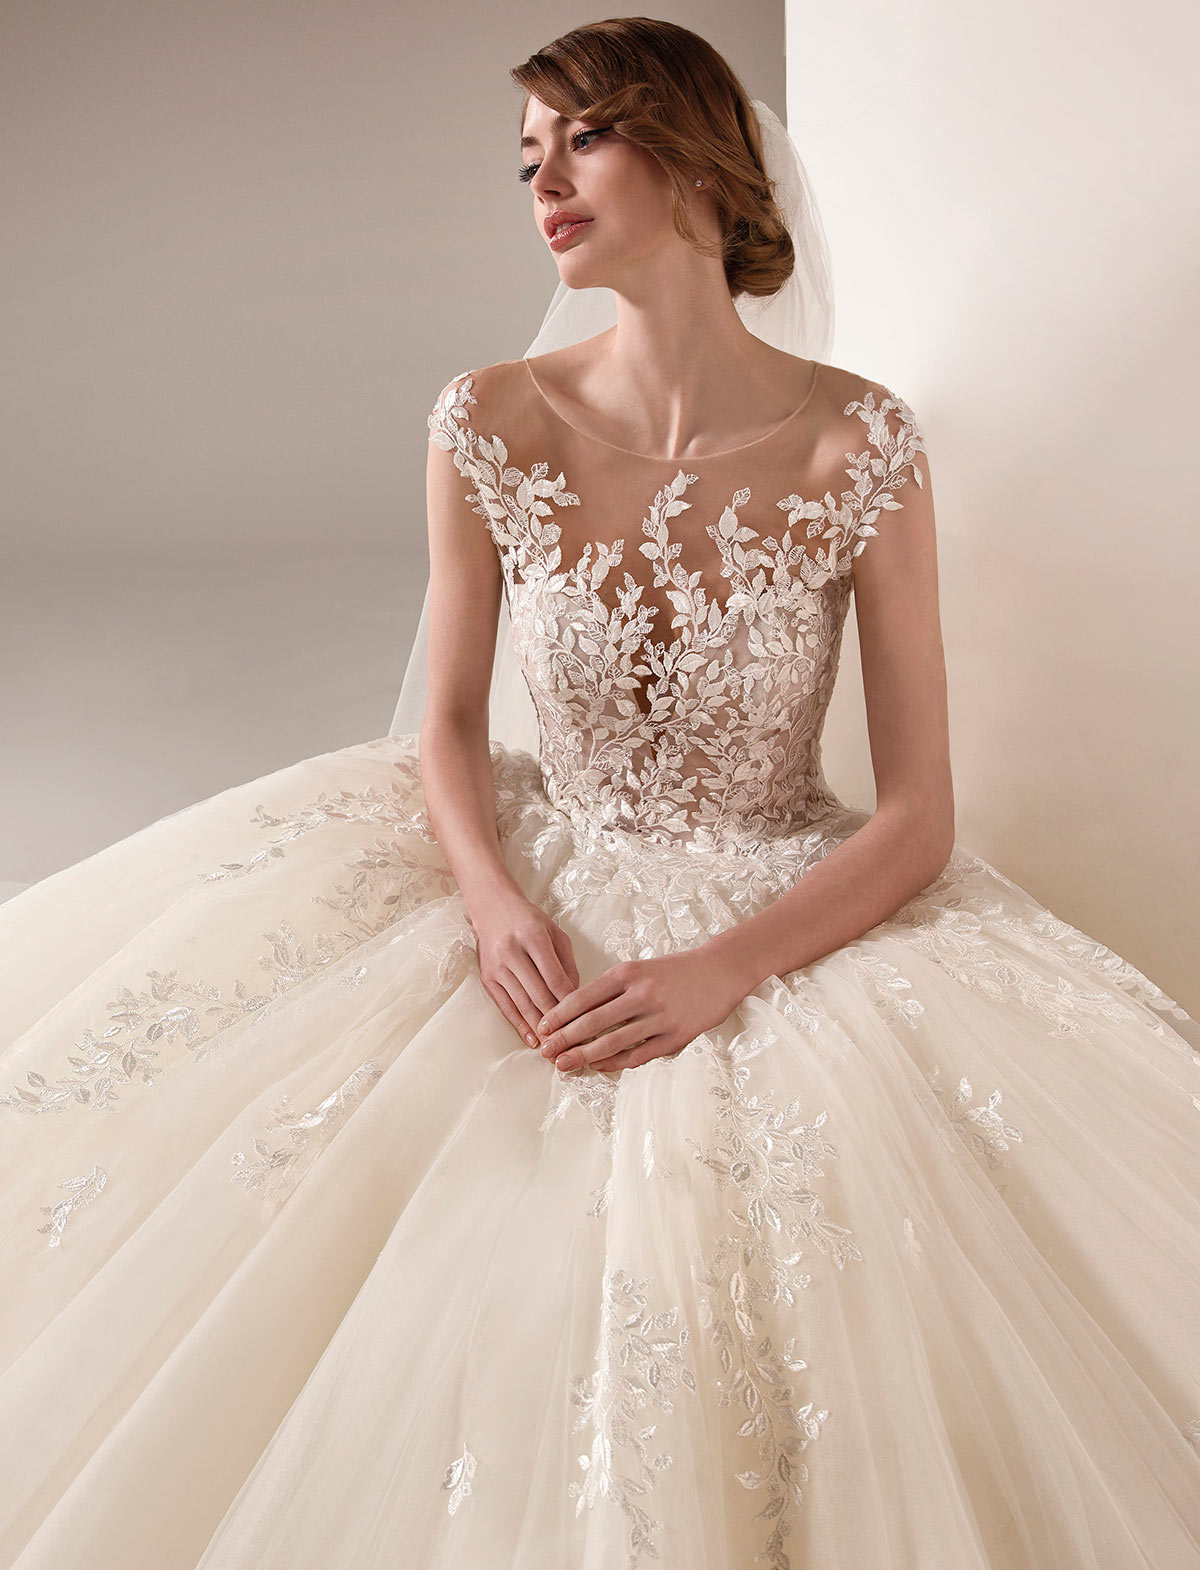 2020 wedding dress collections